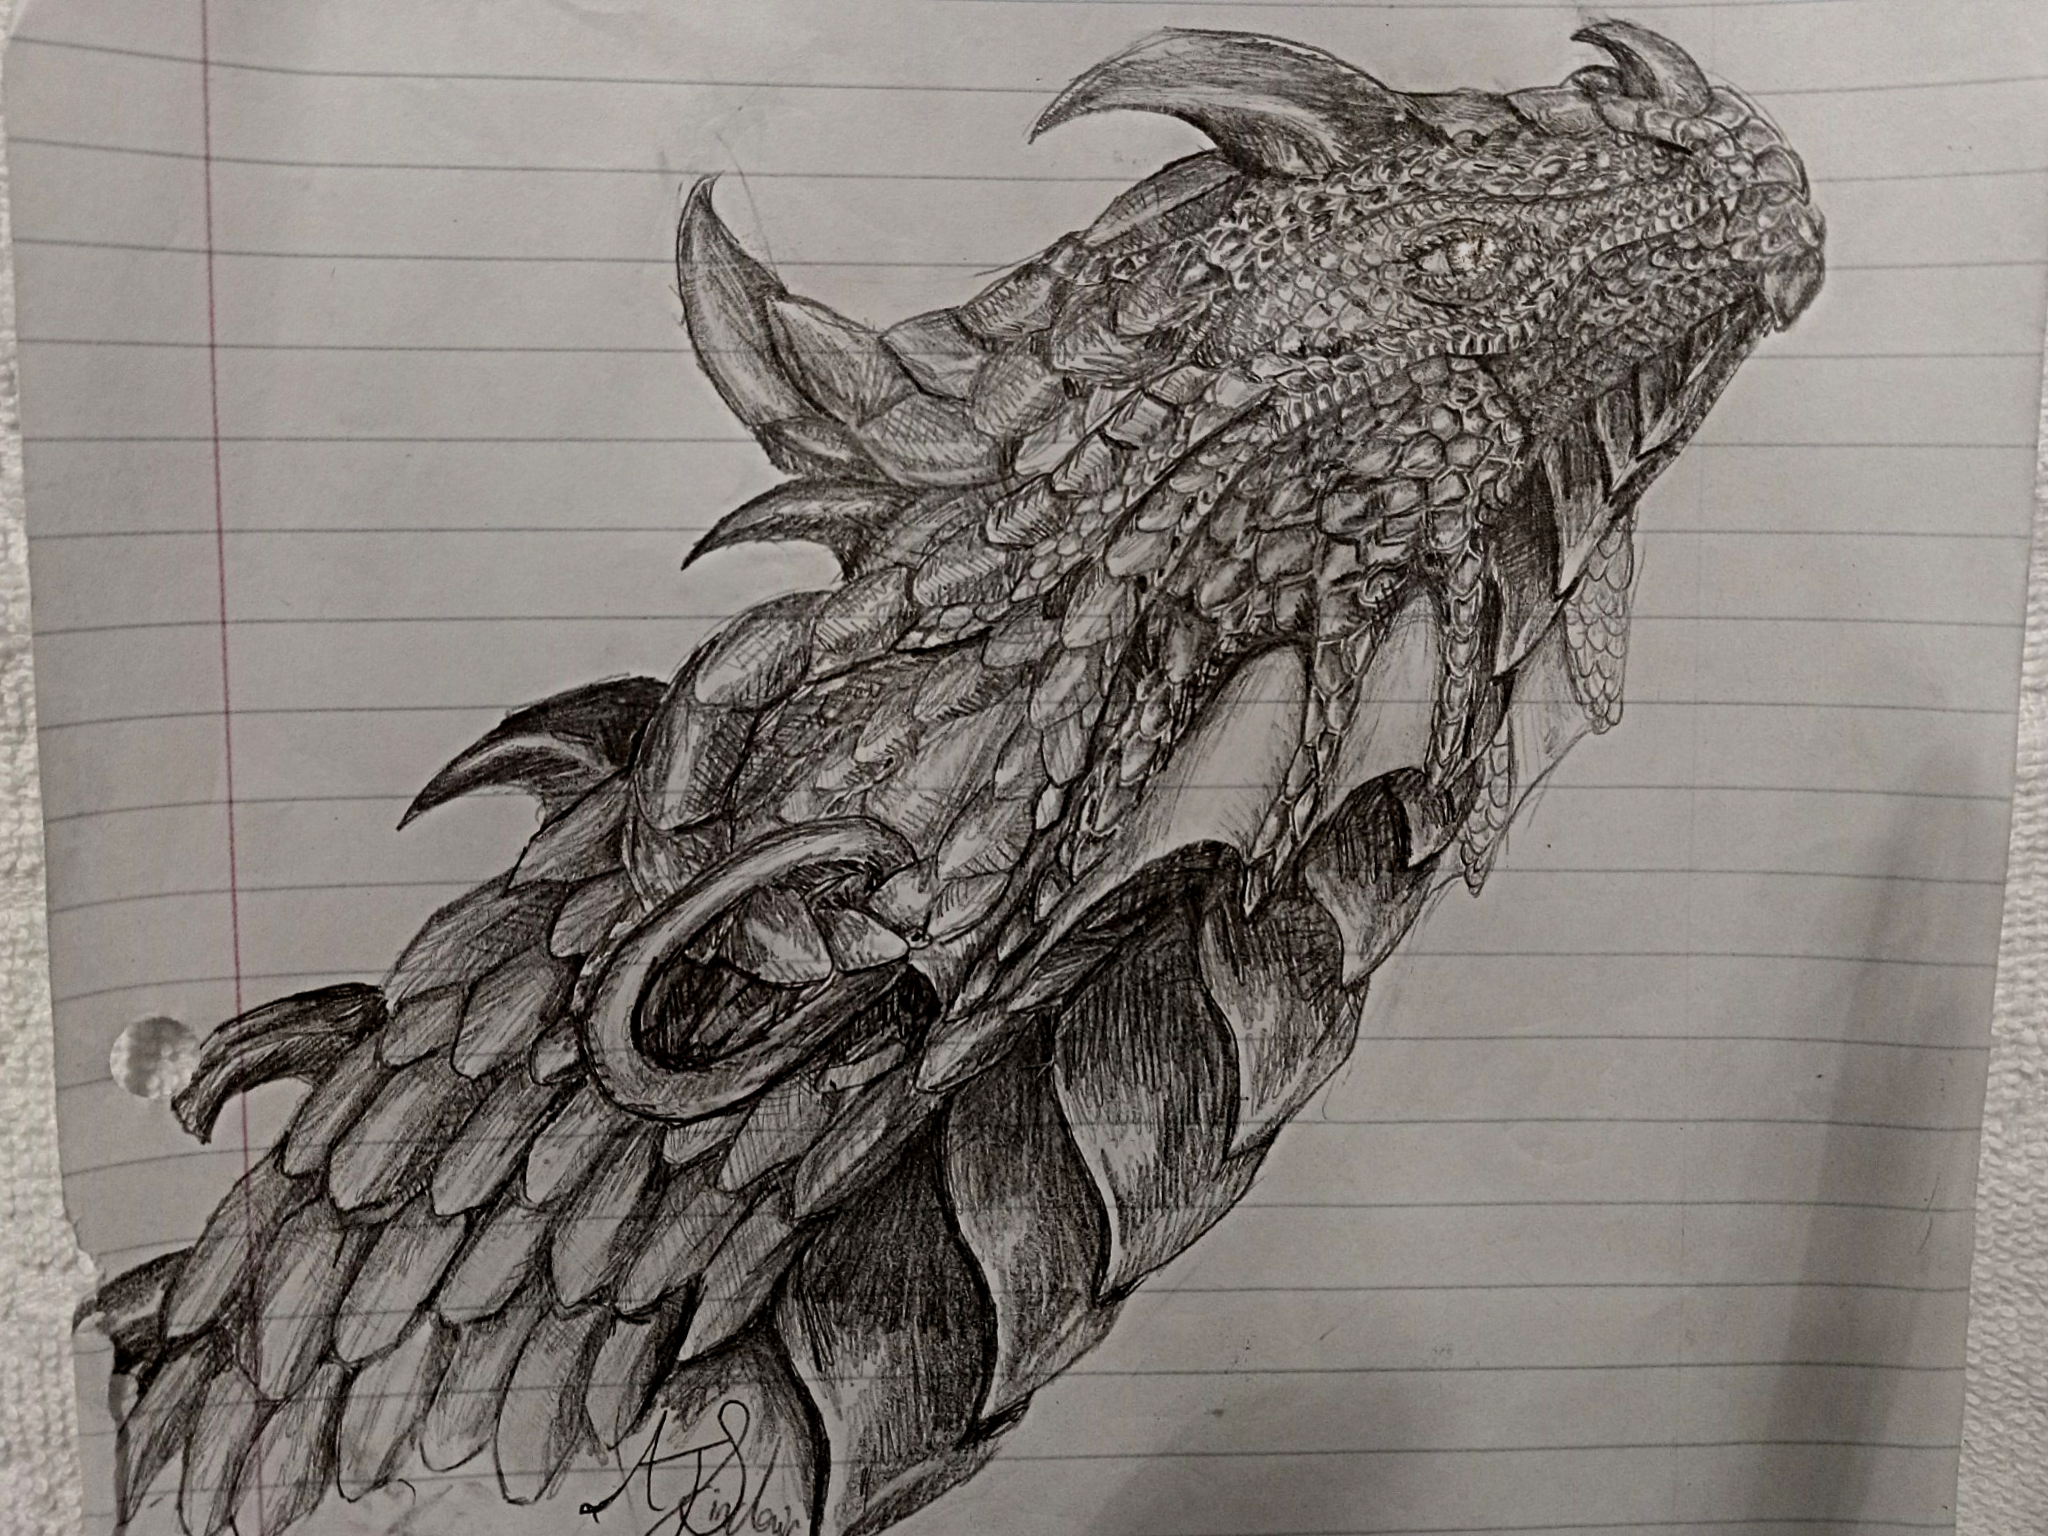 A pencil drawing on lined paper of a dragon's head and neck with many rendered scales. She has extended lobes under her horns that have a ring in them, and a webbed chin.